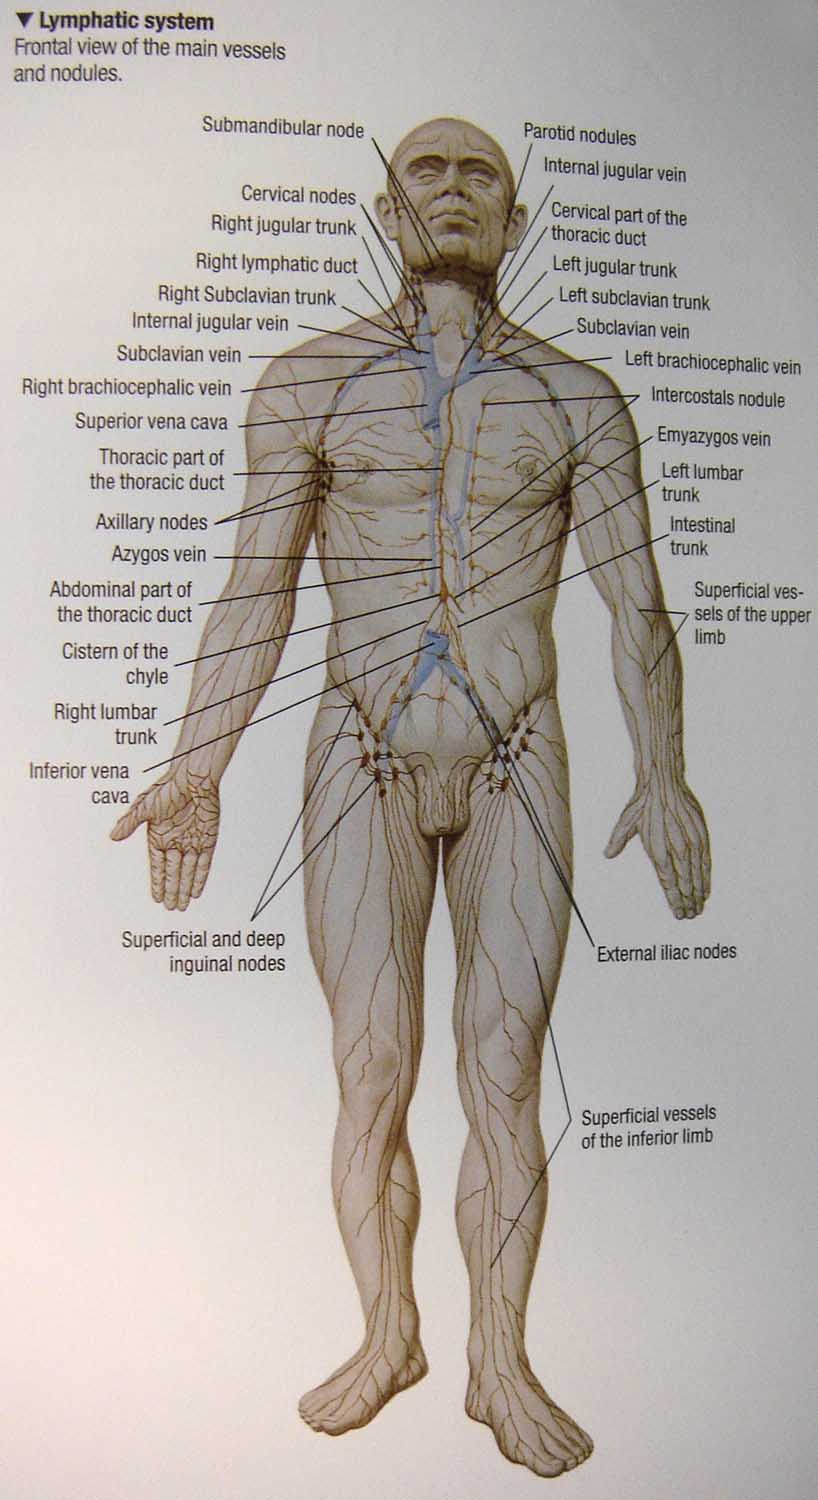 [CLL+lymphatic+system+lores.jpg]